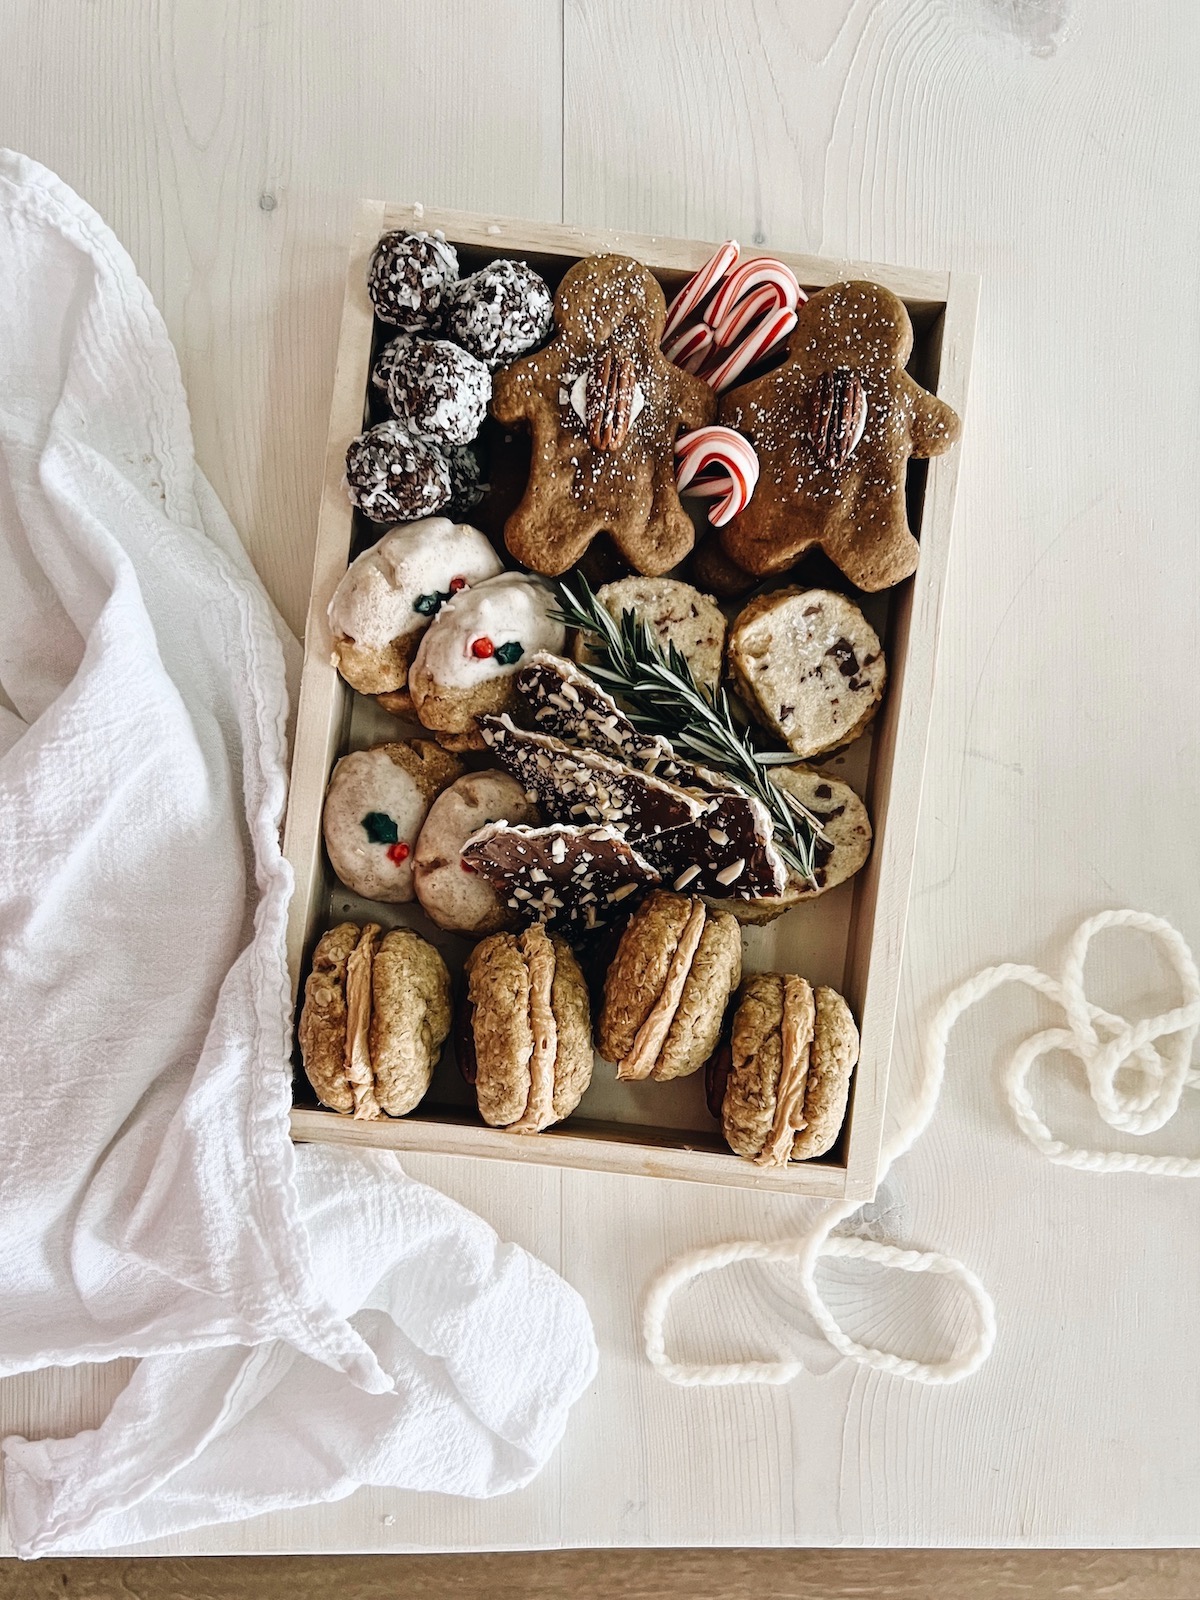 How to Make the Perfect Cookie Box - The New York Times